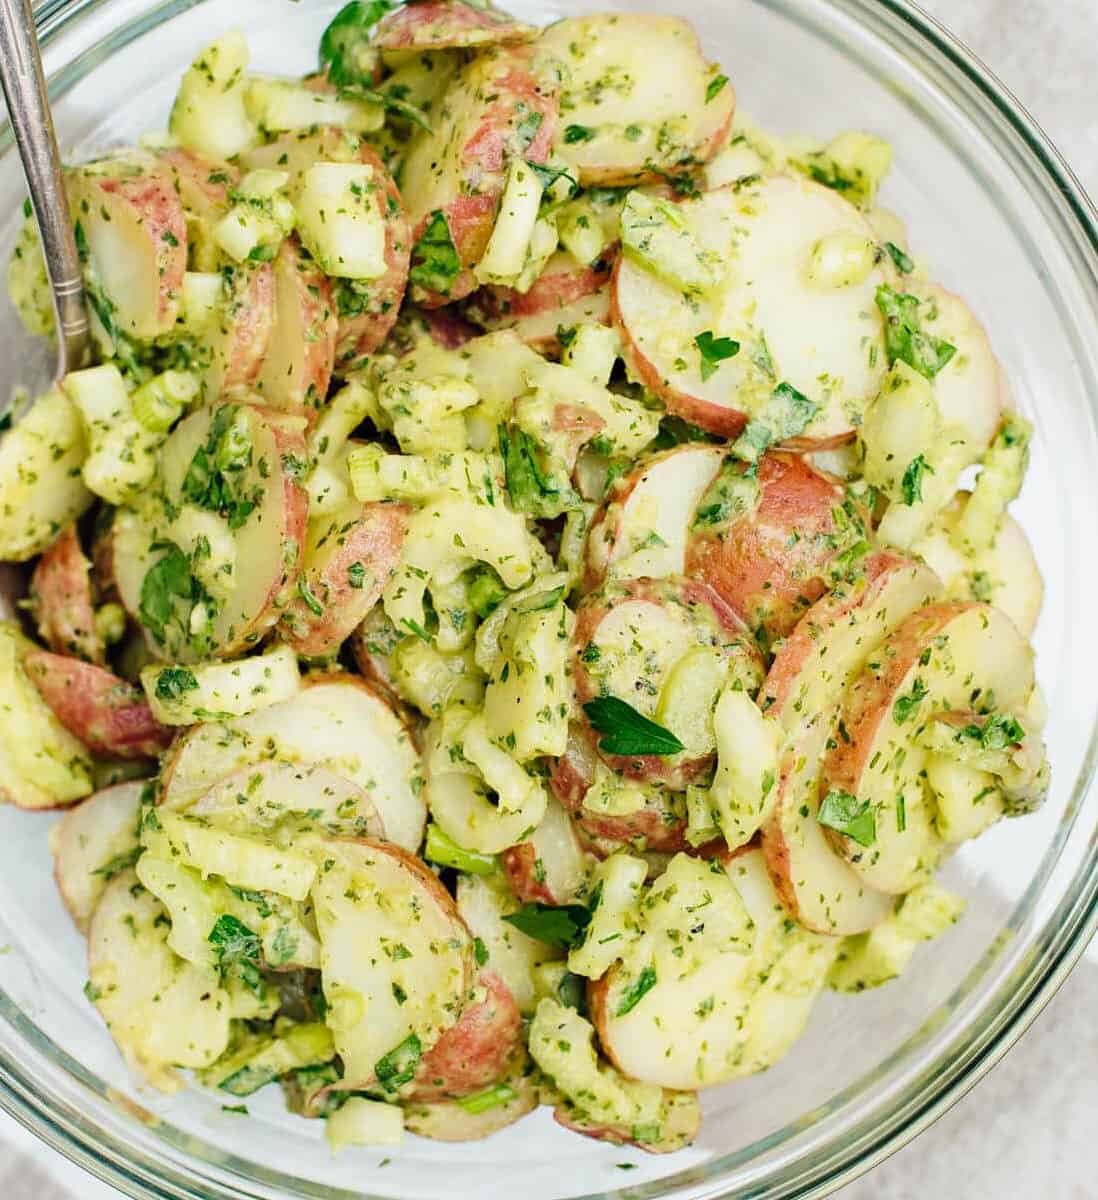  The combination of crunchy celery, fresh dill, and creamy potatoes make this salad a winning dish.